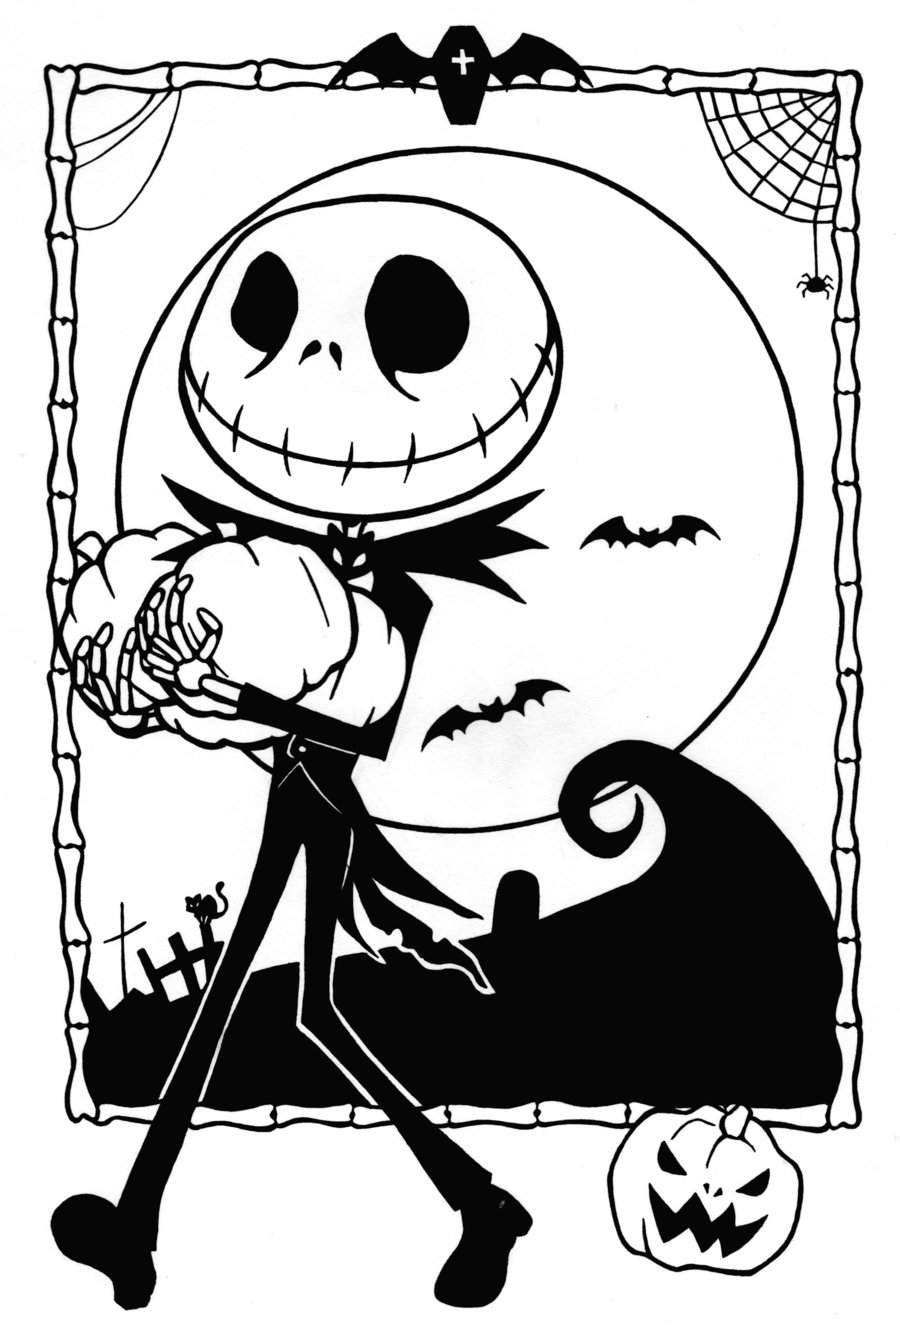 Download Free Printable Nightmare Before Christmas Coloring Pages ...